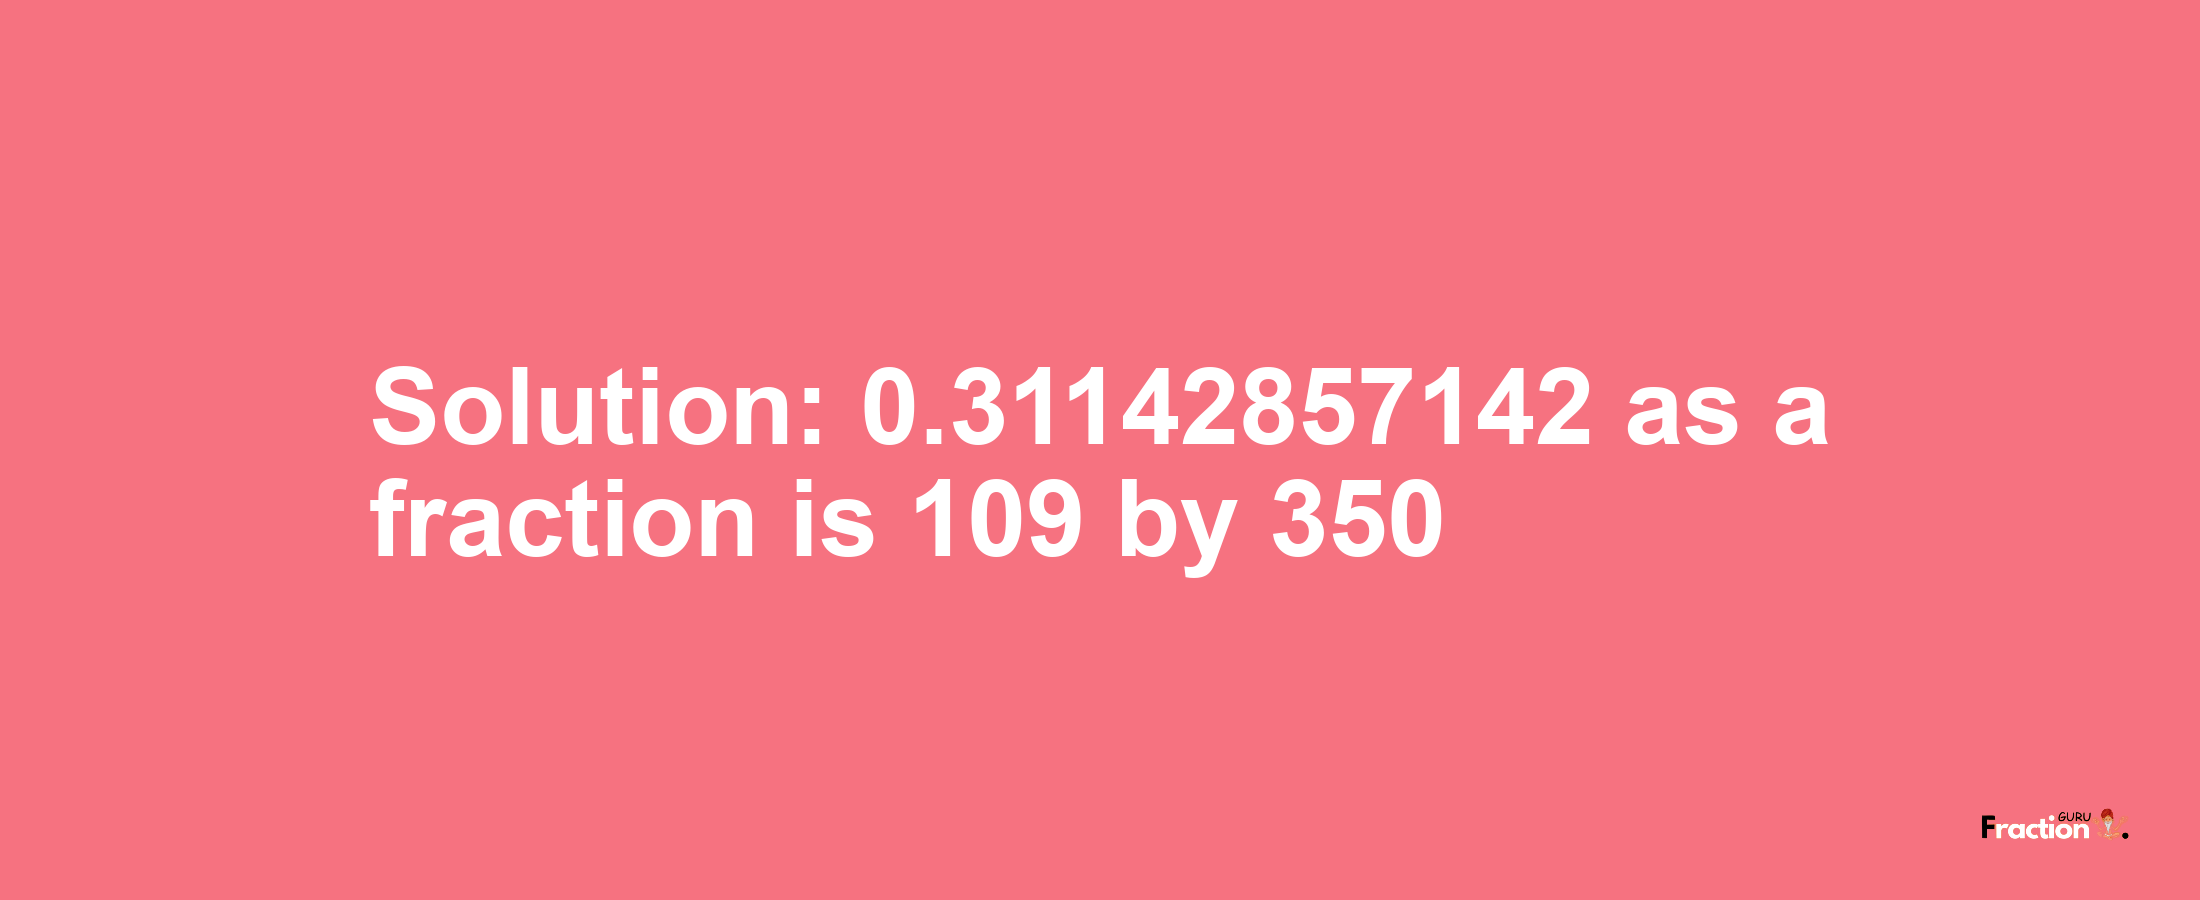 Solution:0.31142857142 as a fraction is 109/350